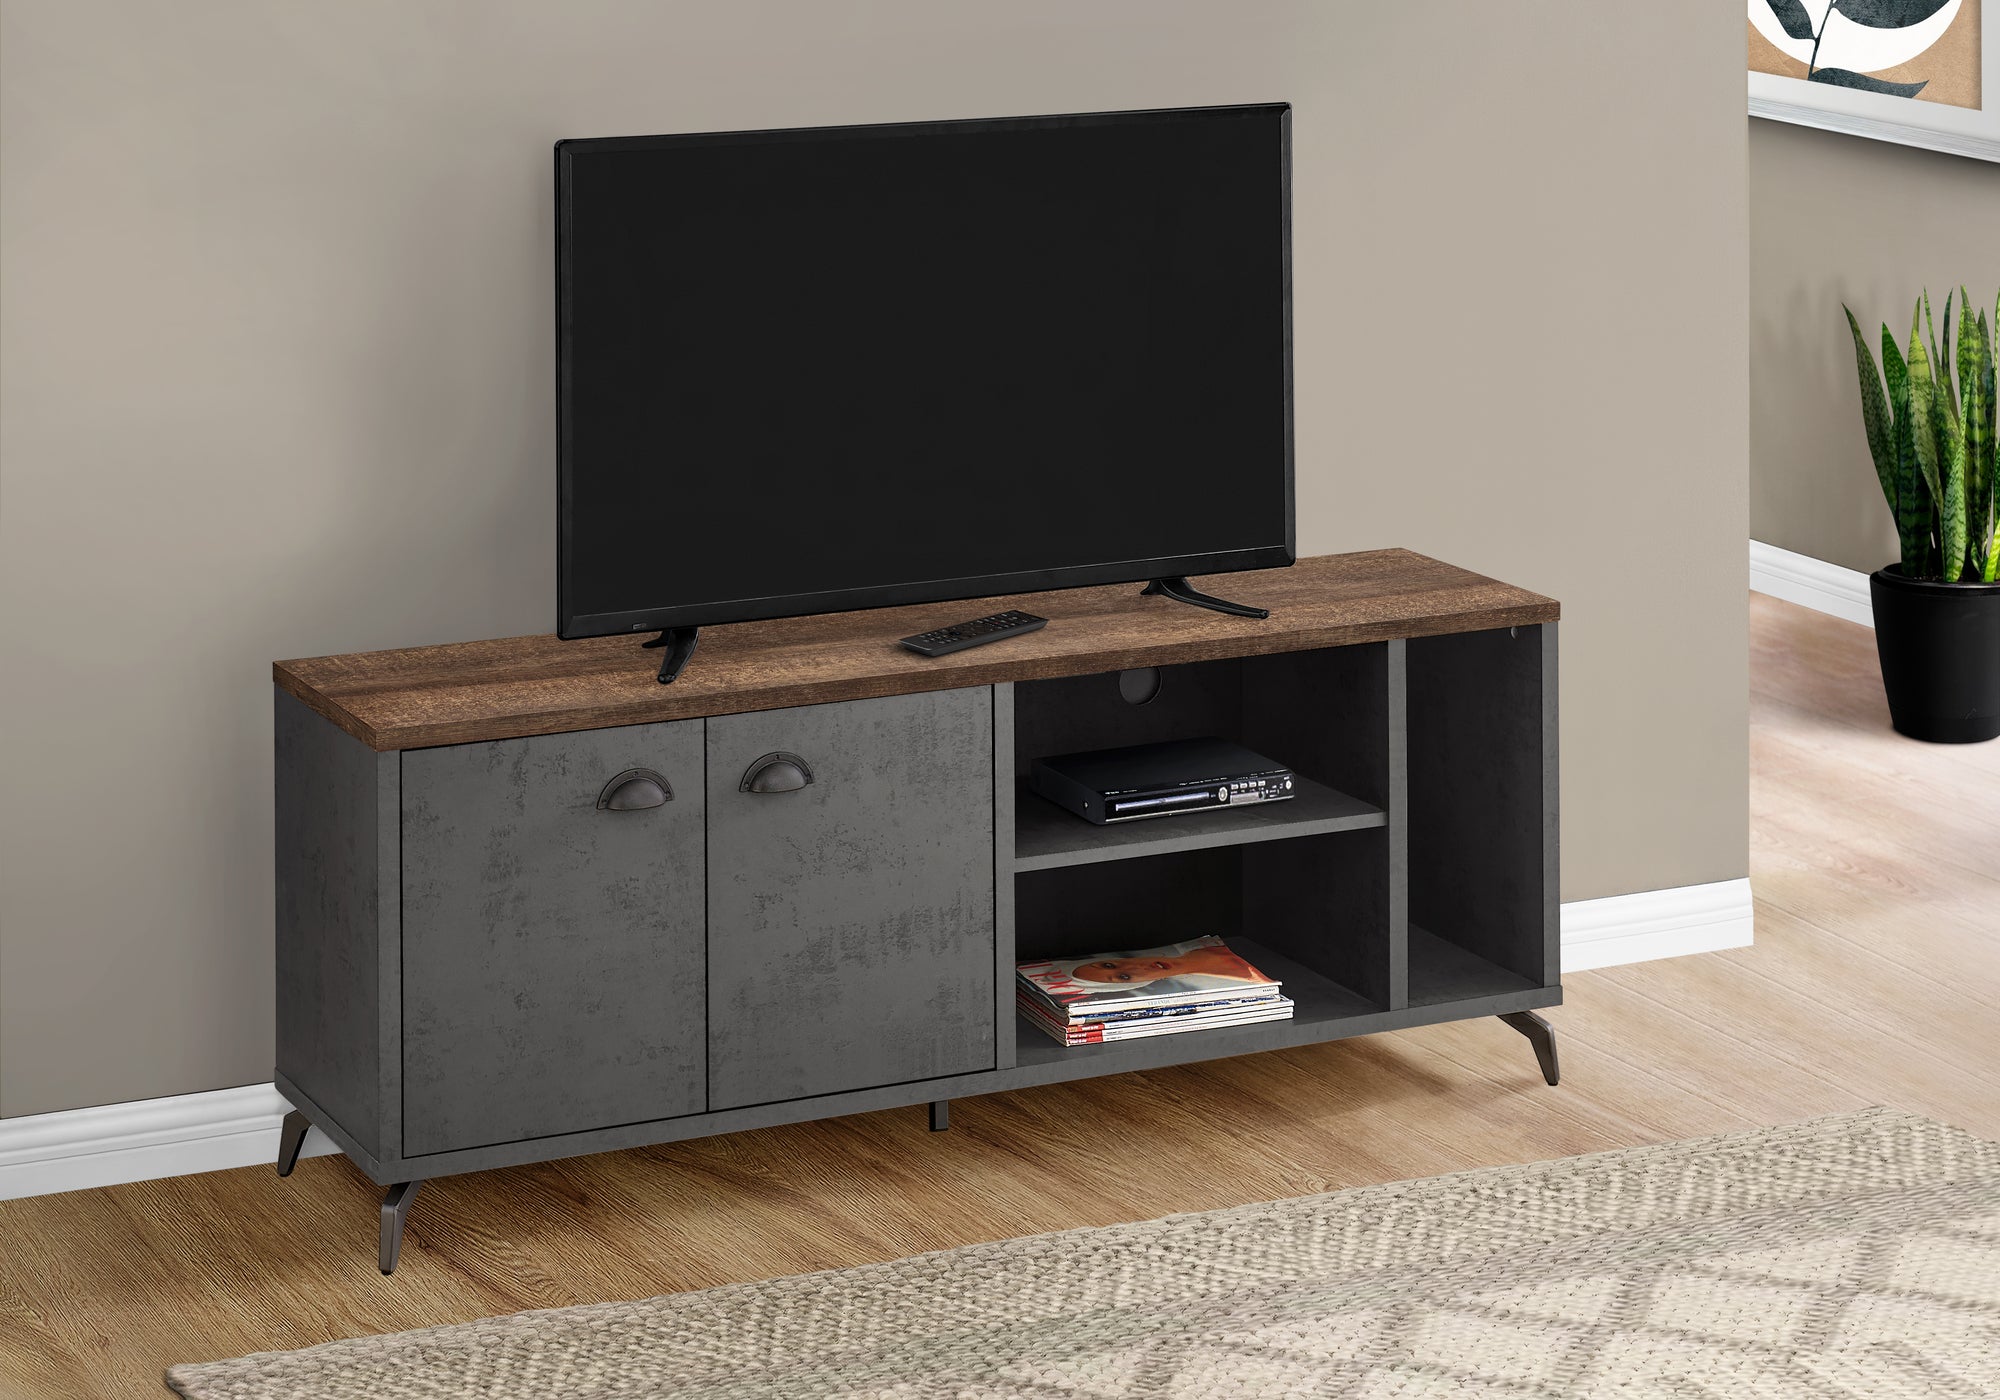 MN-482831    Tv Stand, 60 Inch, Console, Media Entertainment Center, Storage Cabinet, Living Room, Bedroom, Laminate, Metal, Grey Concrete, Brown Reclaimed Wood Look, Contemporary, Industrial, Modern